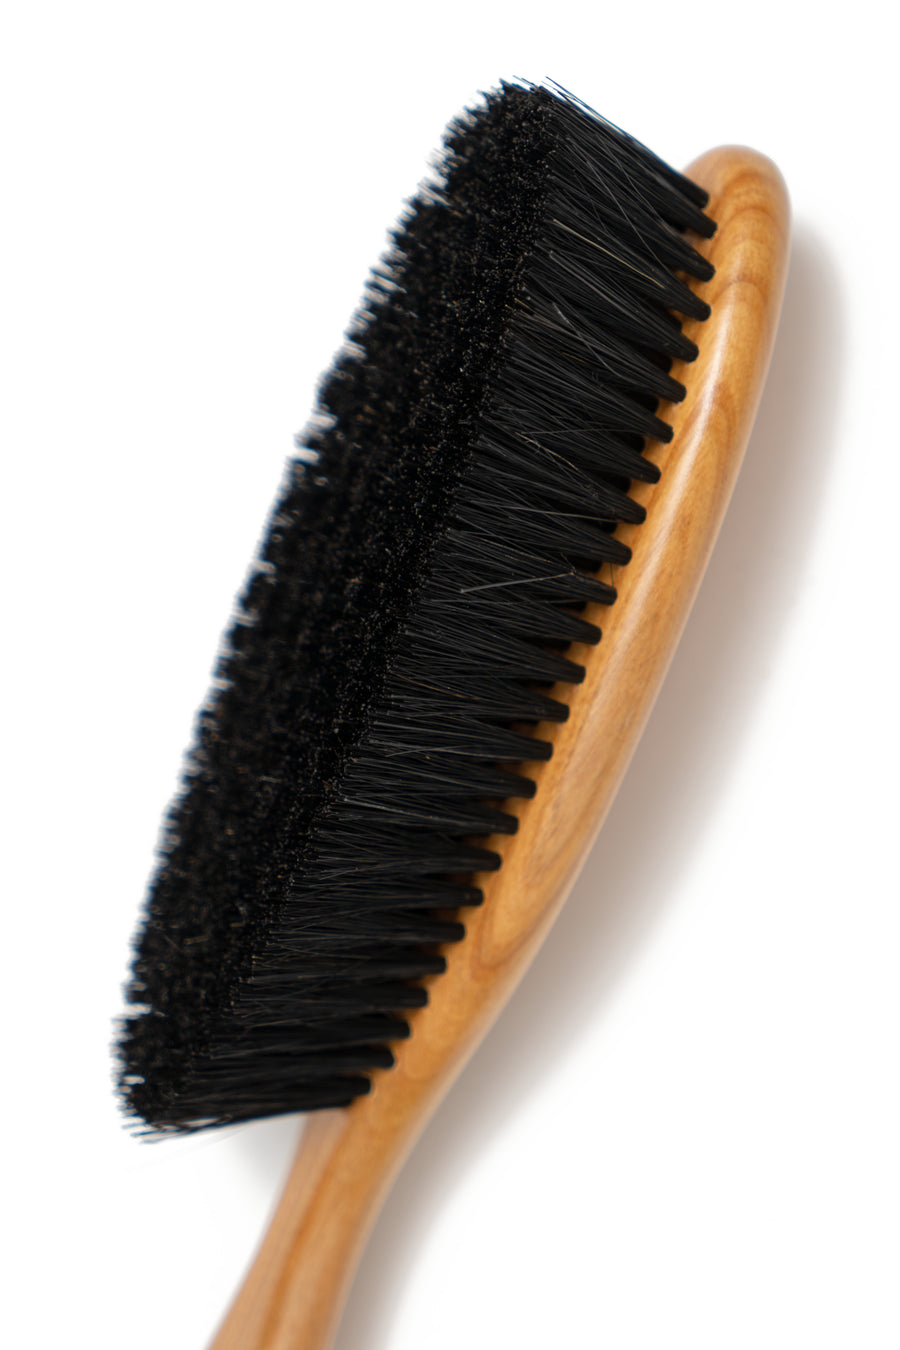 ”KENT” CASHMERE WOOL BRUSH FOR BODHI